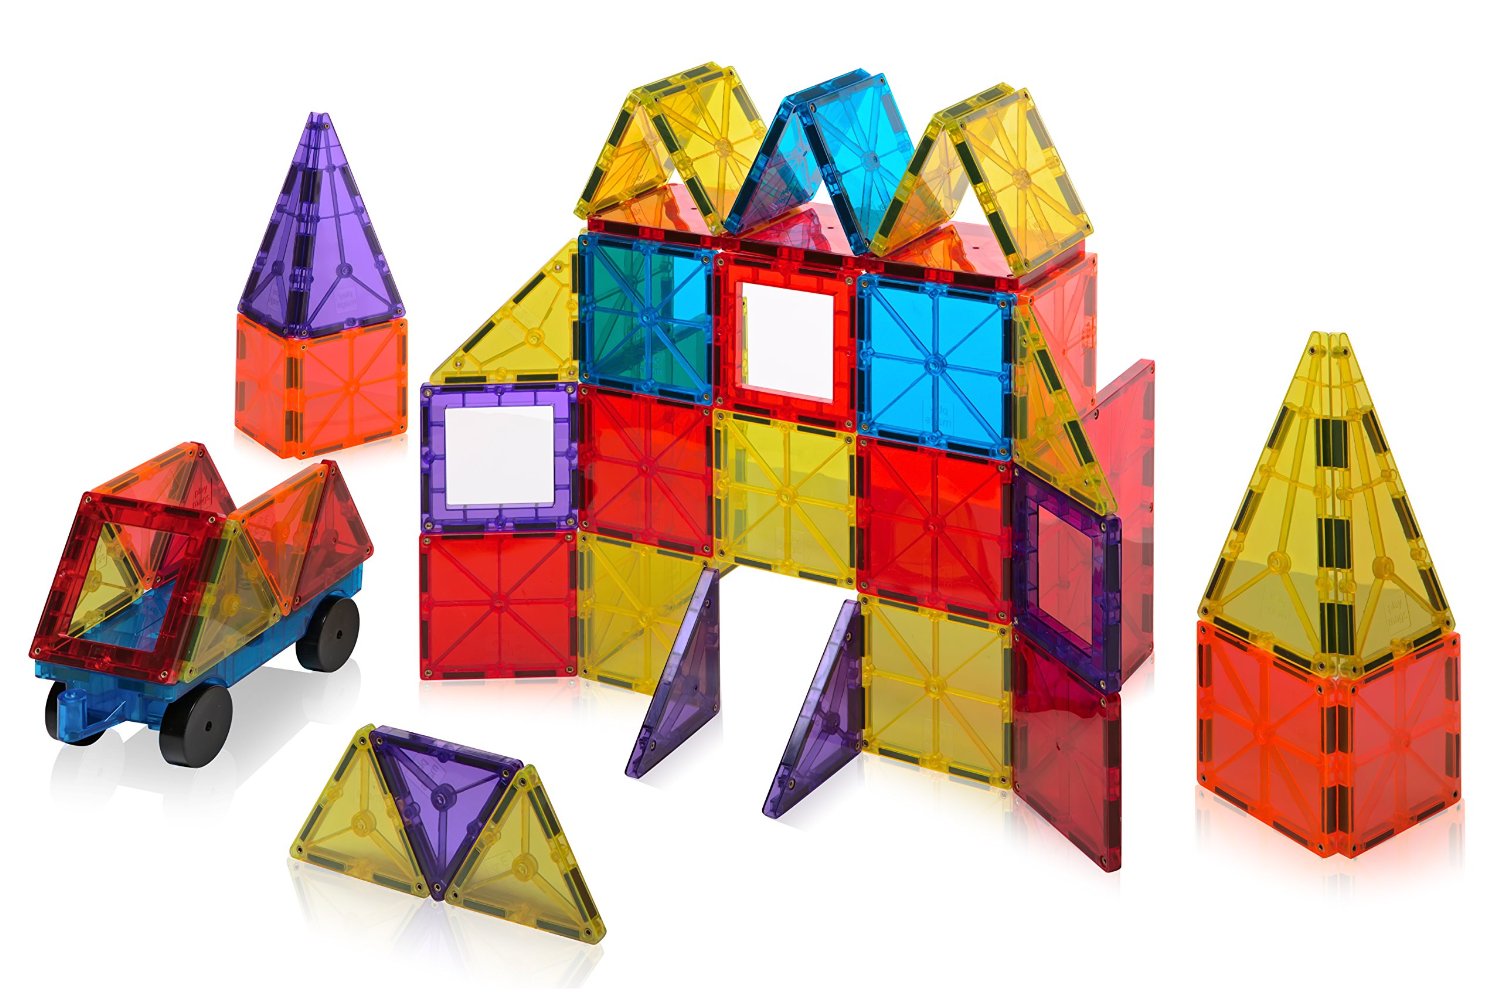 Amazon: Playmags Clear Colors Magnetic Tiles Building Set 60 Piece Starter Set Only $23.99!